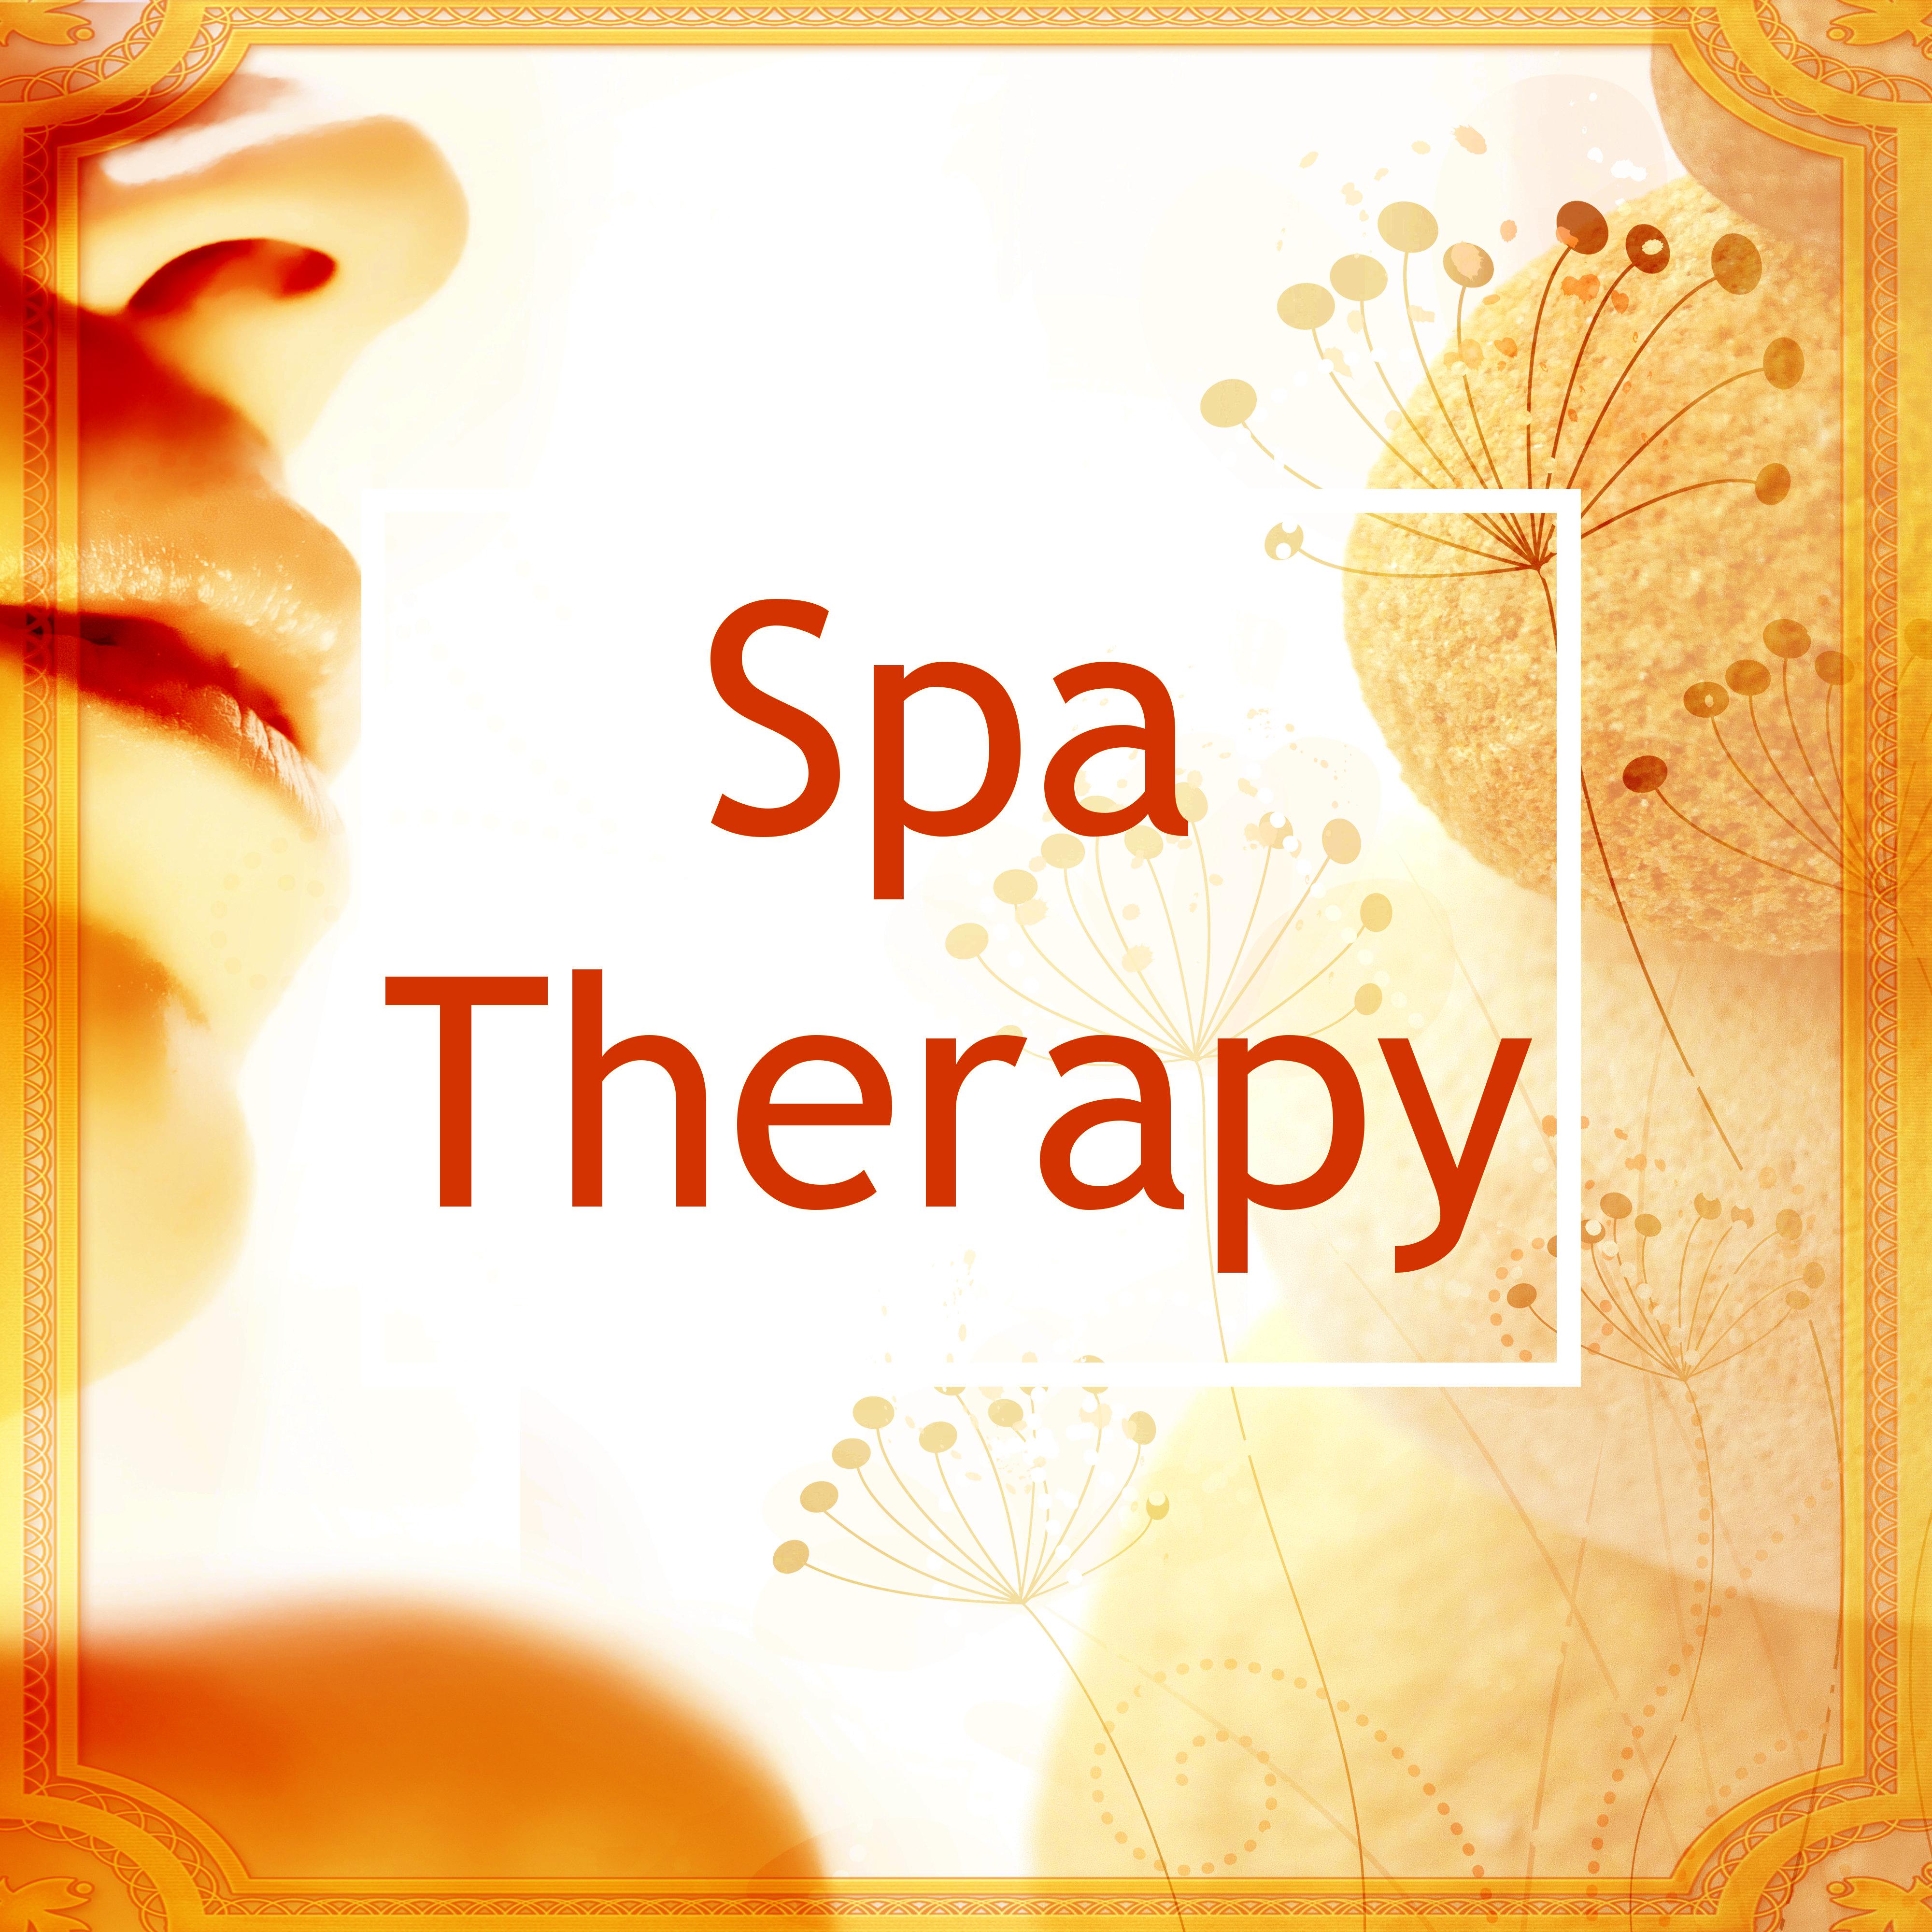 Spa Therapy  Beautiful Moments In Spa, Time for Relax, Reiki, Wellness, Sleep, Natural White Noise, Reflexology, Shiatsu, Physical Therapy